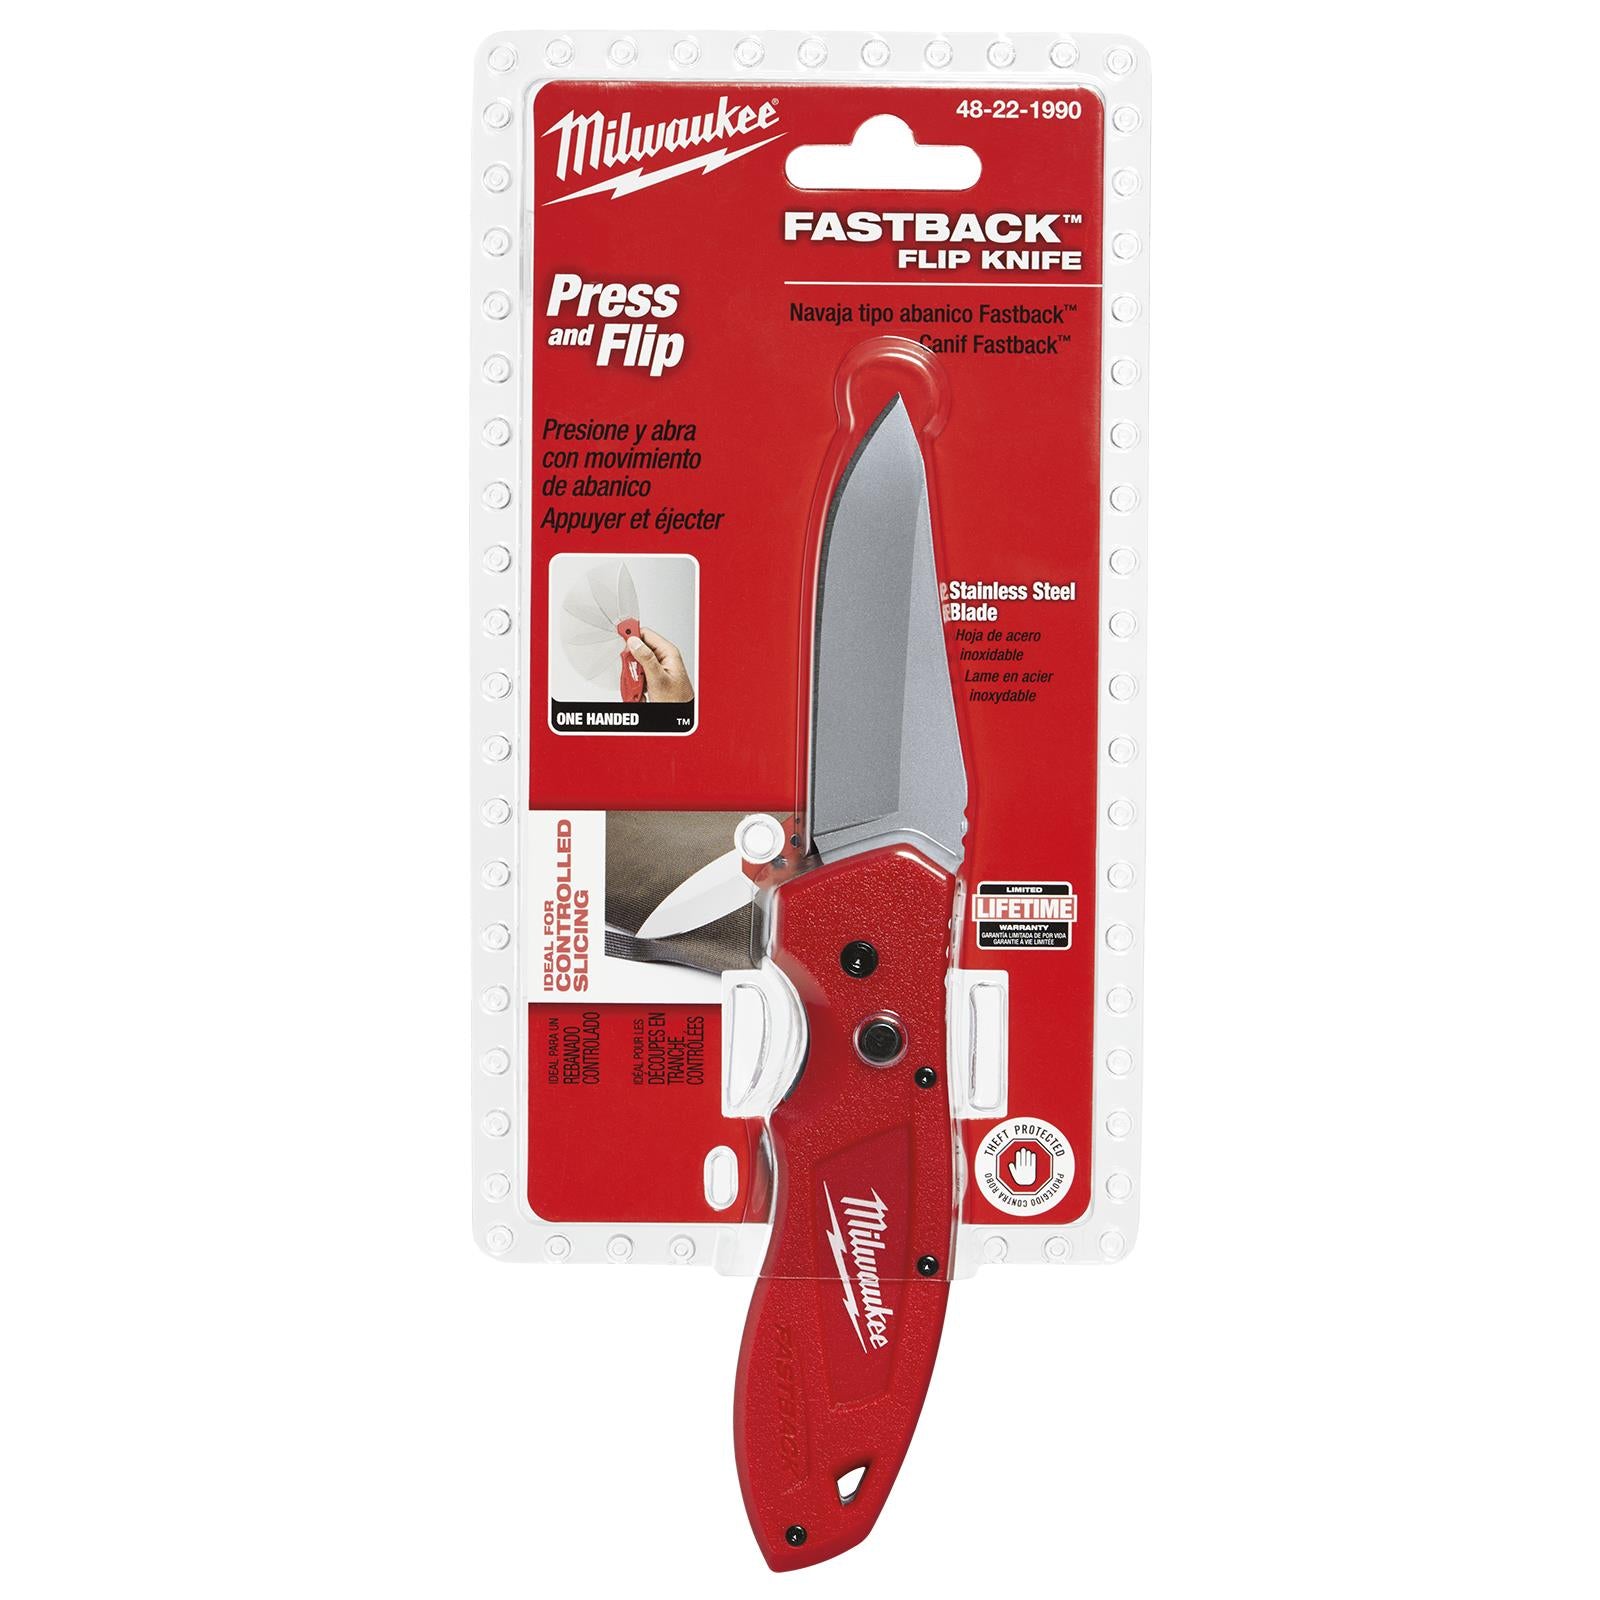 Milwaukee 48-22-4049 Electrician Scissors with Extended Handle - BC  Fasteners & Tools